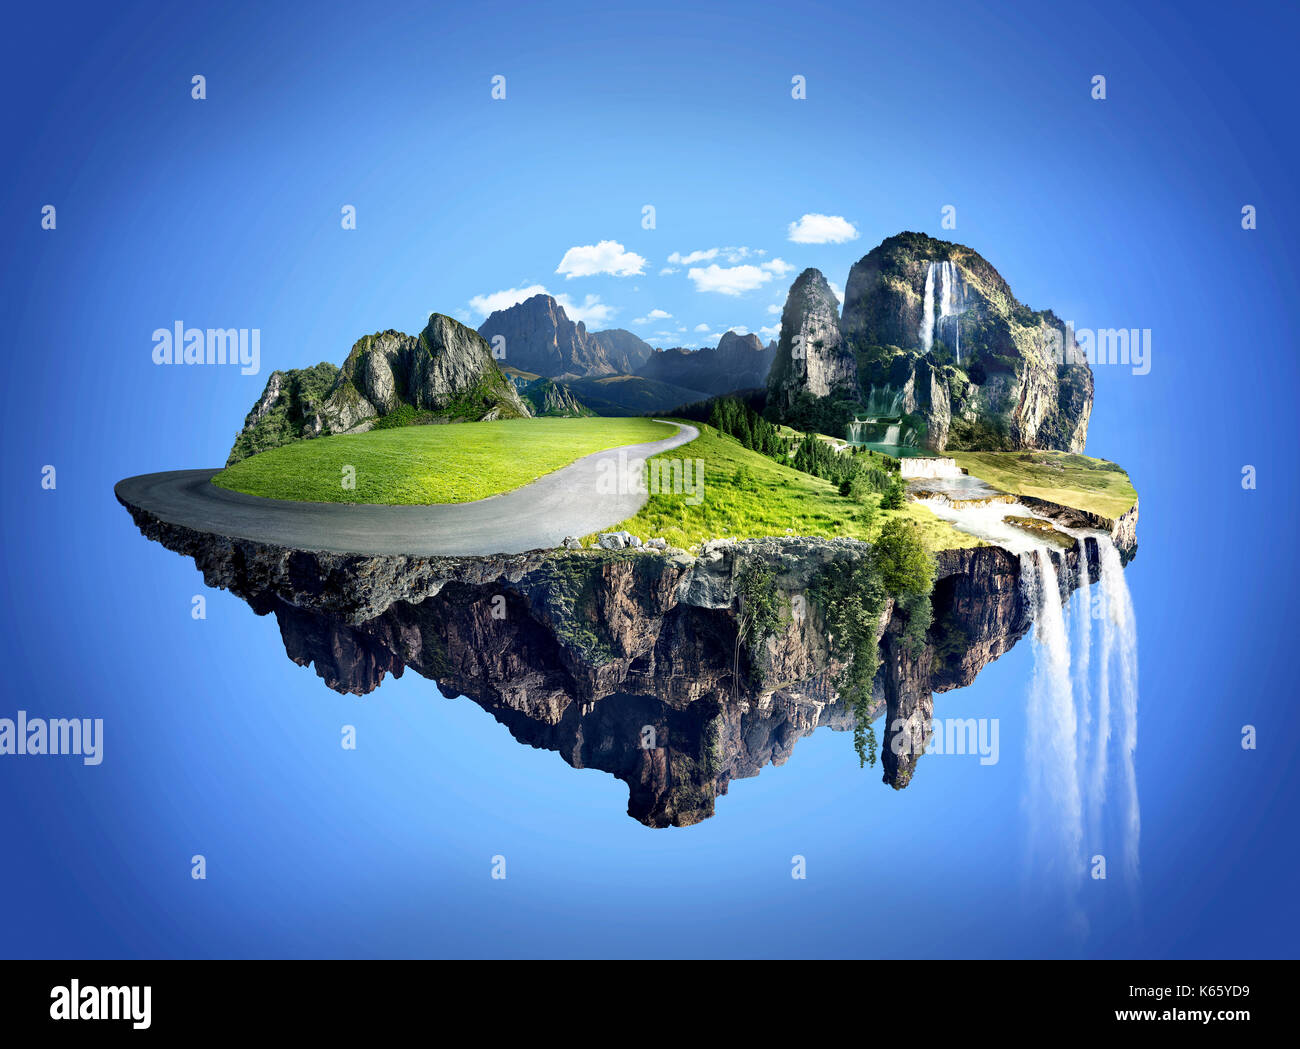 floating island in the sky wallpaper